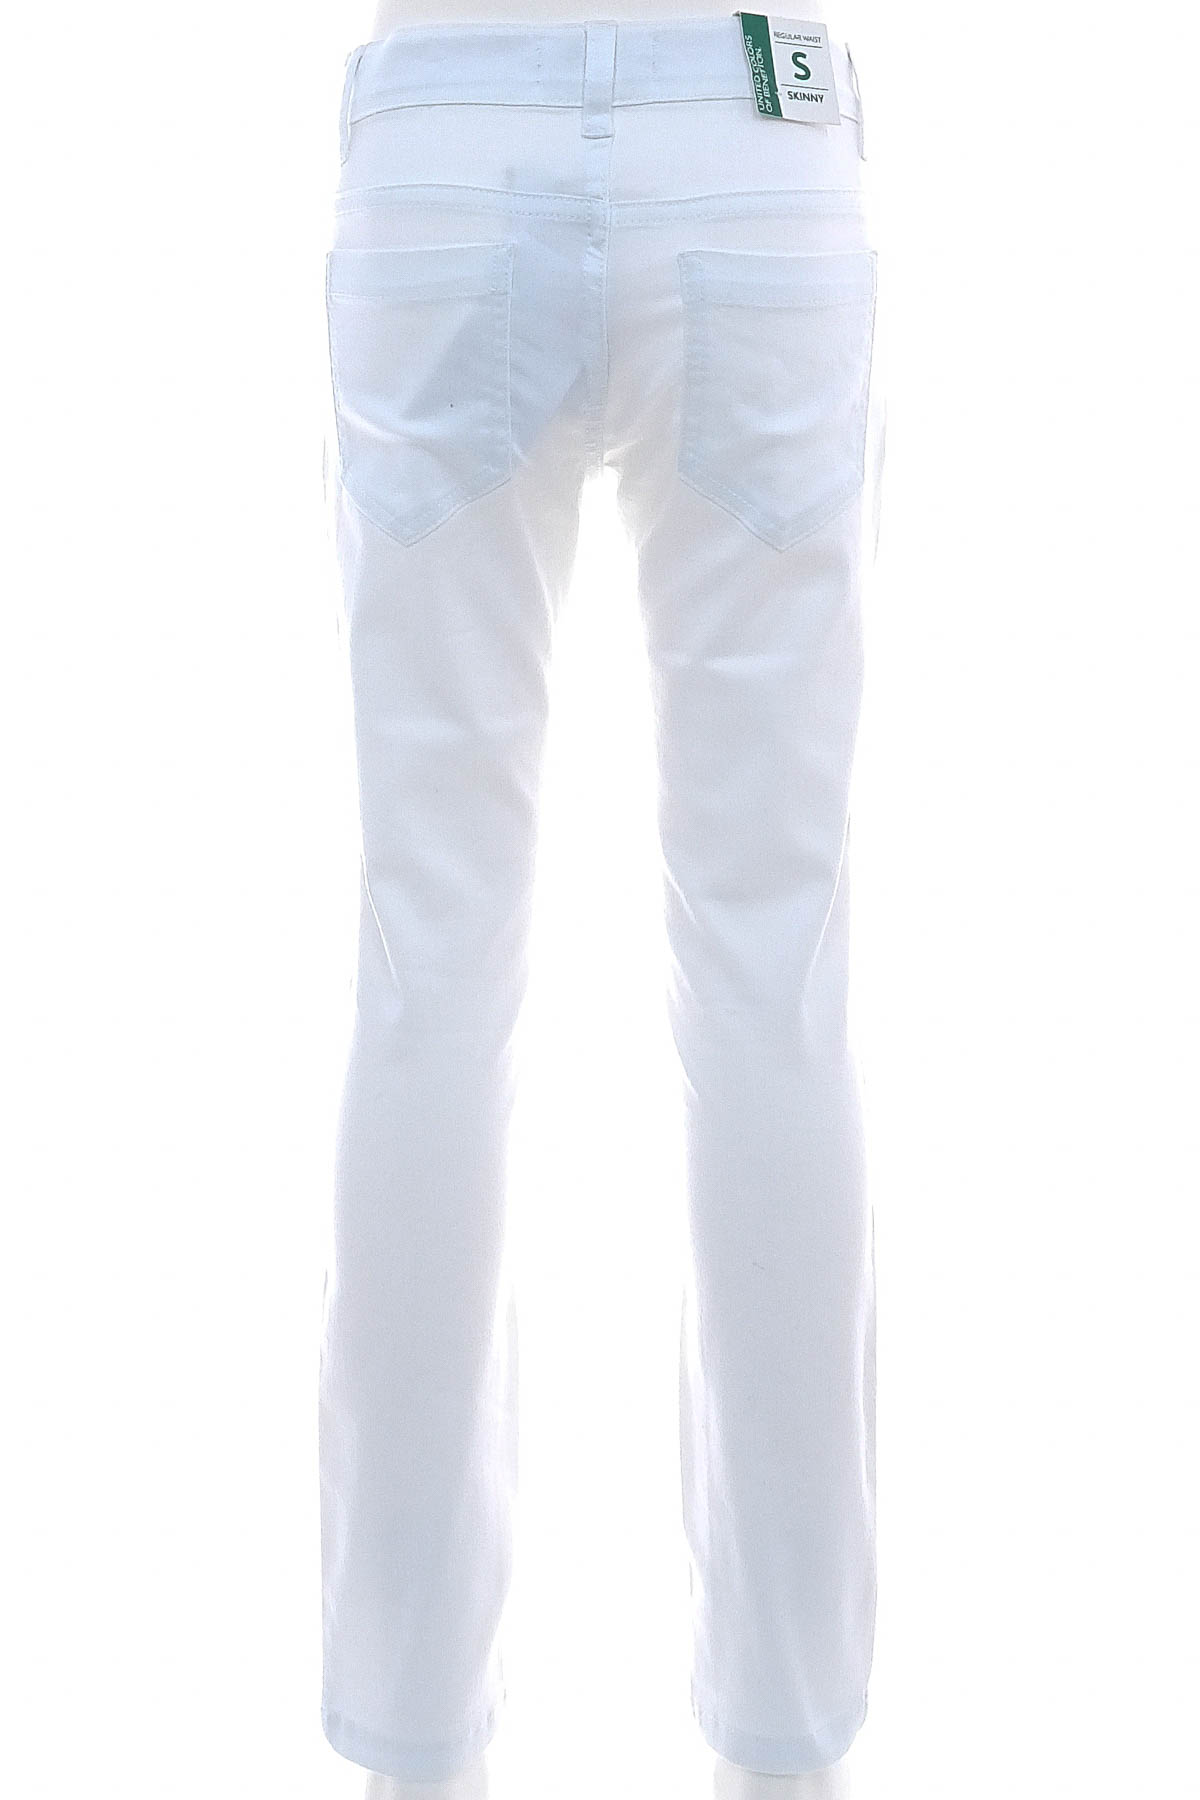 Trousers for girl - United Colors of Benetton - 1